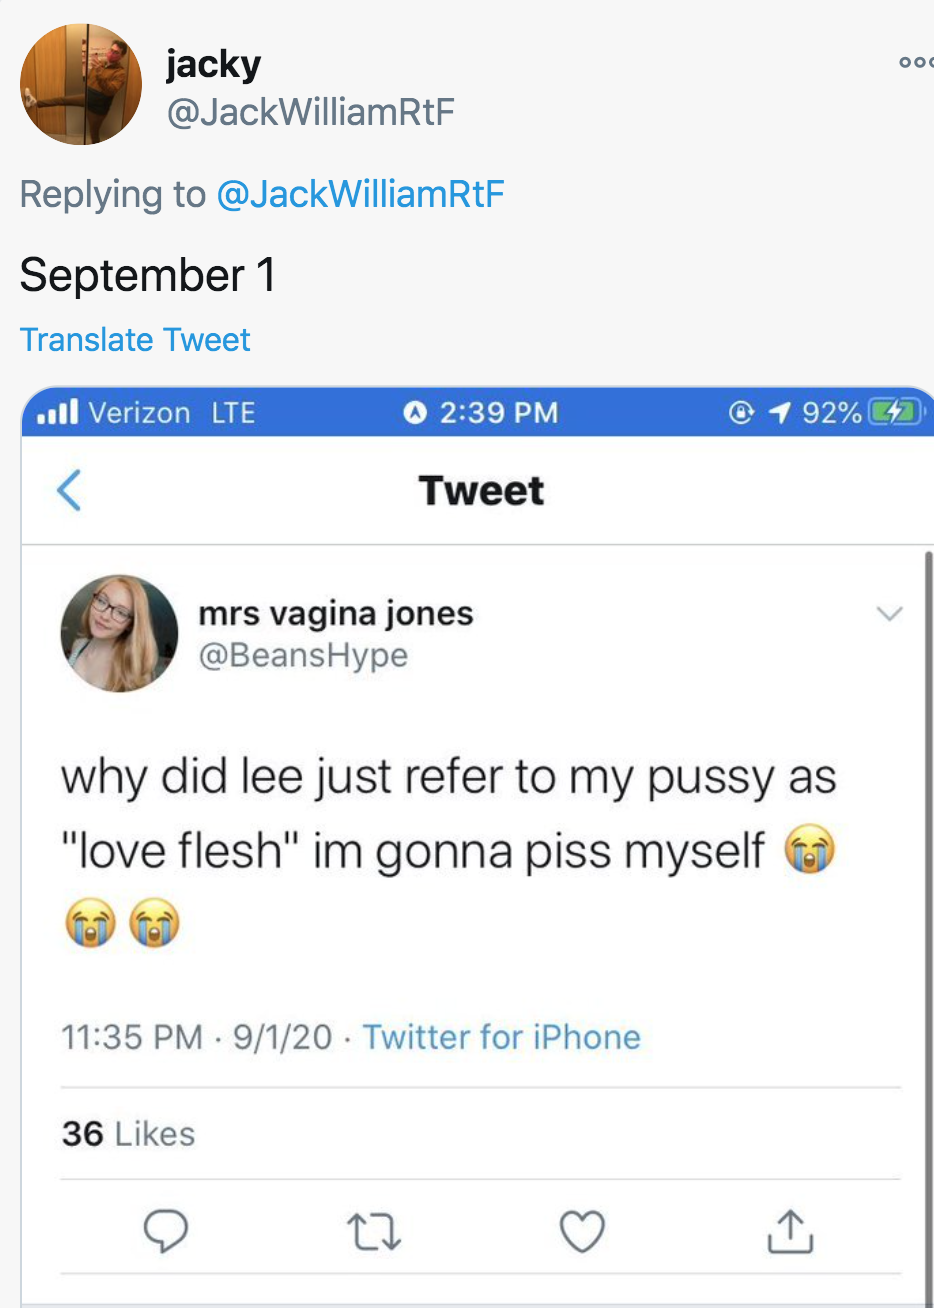 web page - jacky WilliamRtF September 1 Translate Tweet ..Il Verizon Lte Tweet @ 1 92% mrs vagina jones Hype why did lee just refer to my pussy as "love flesh" im gonna piss myself 9120 Twitter for iPhone 36 t2